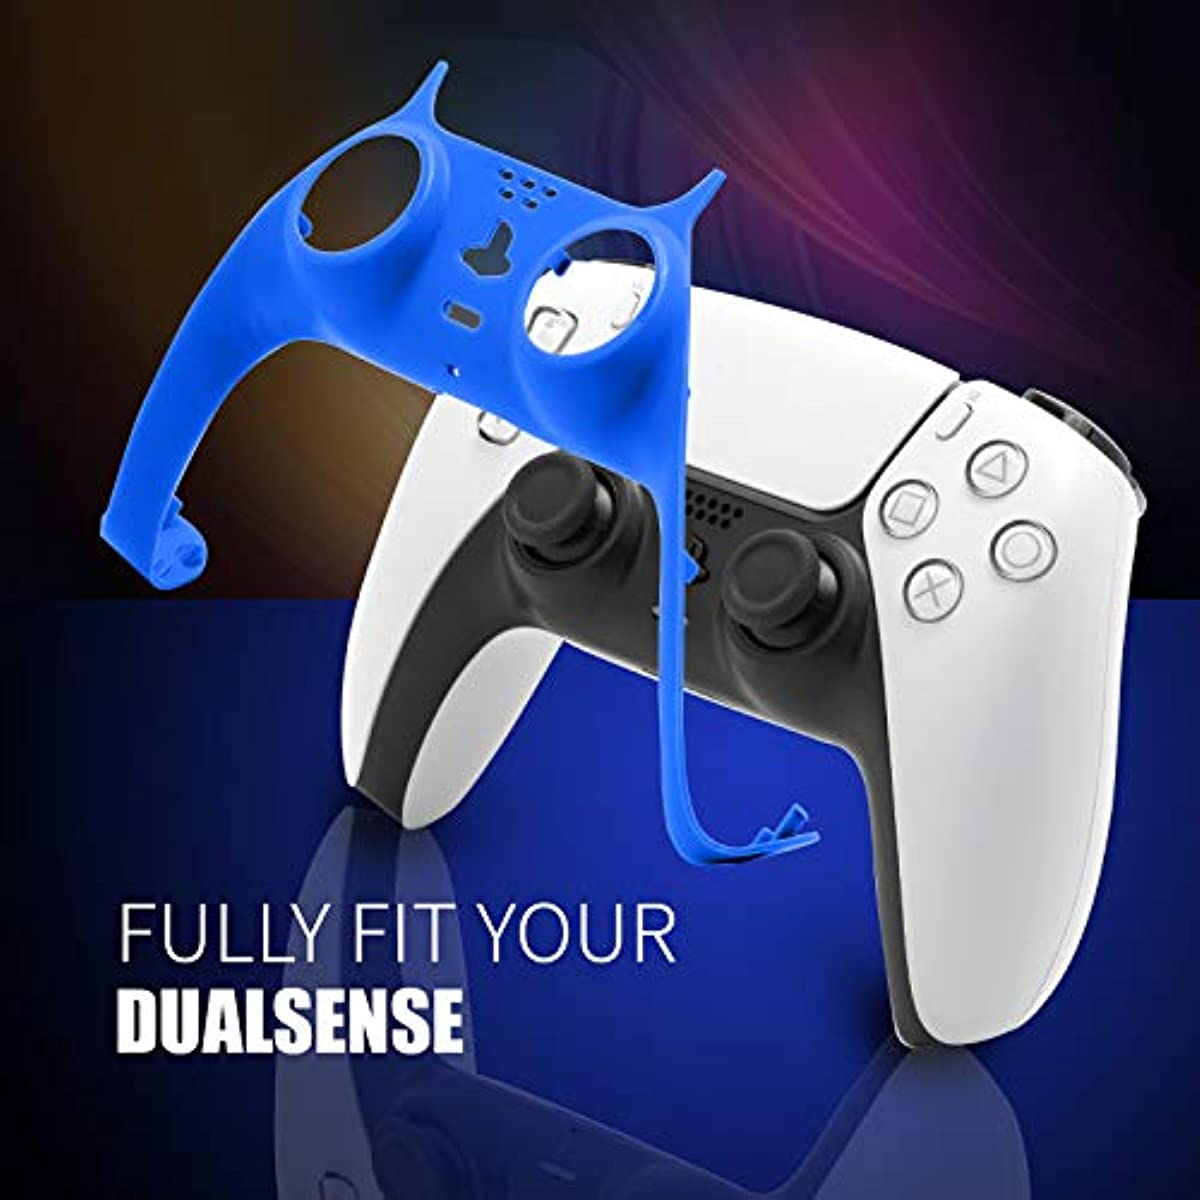 PS5 Controller Accessories, PS5 Controller Plates, PS5 Controller Faceplate 2 Pack - Green and Blue